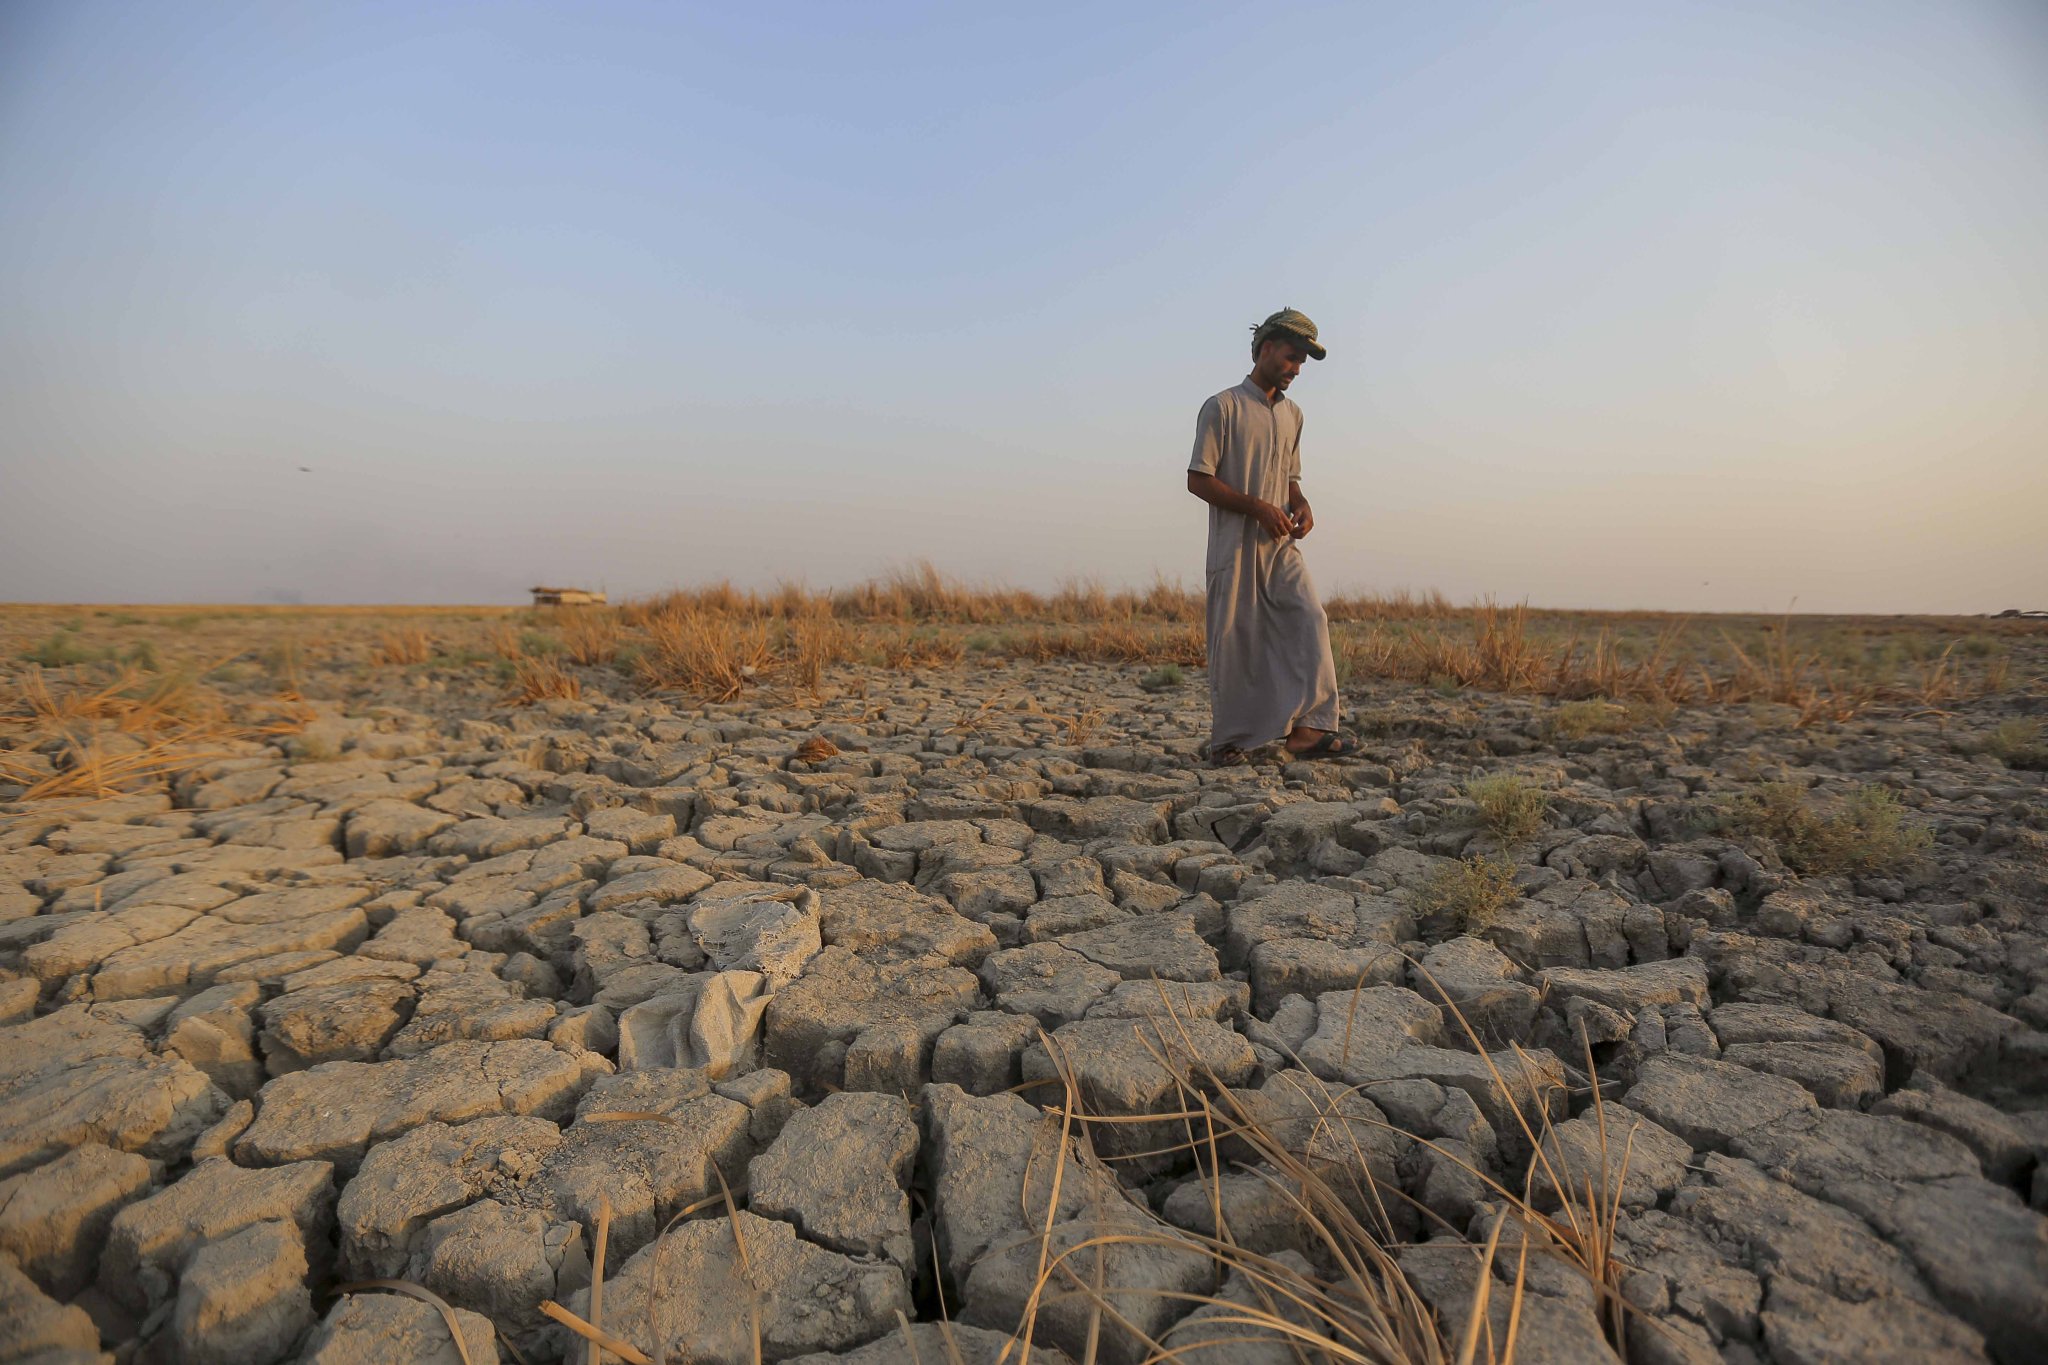 Climate Change and Regional Instability in the Middle East